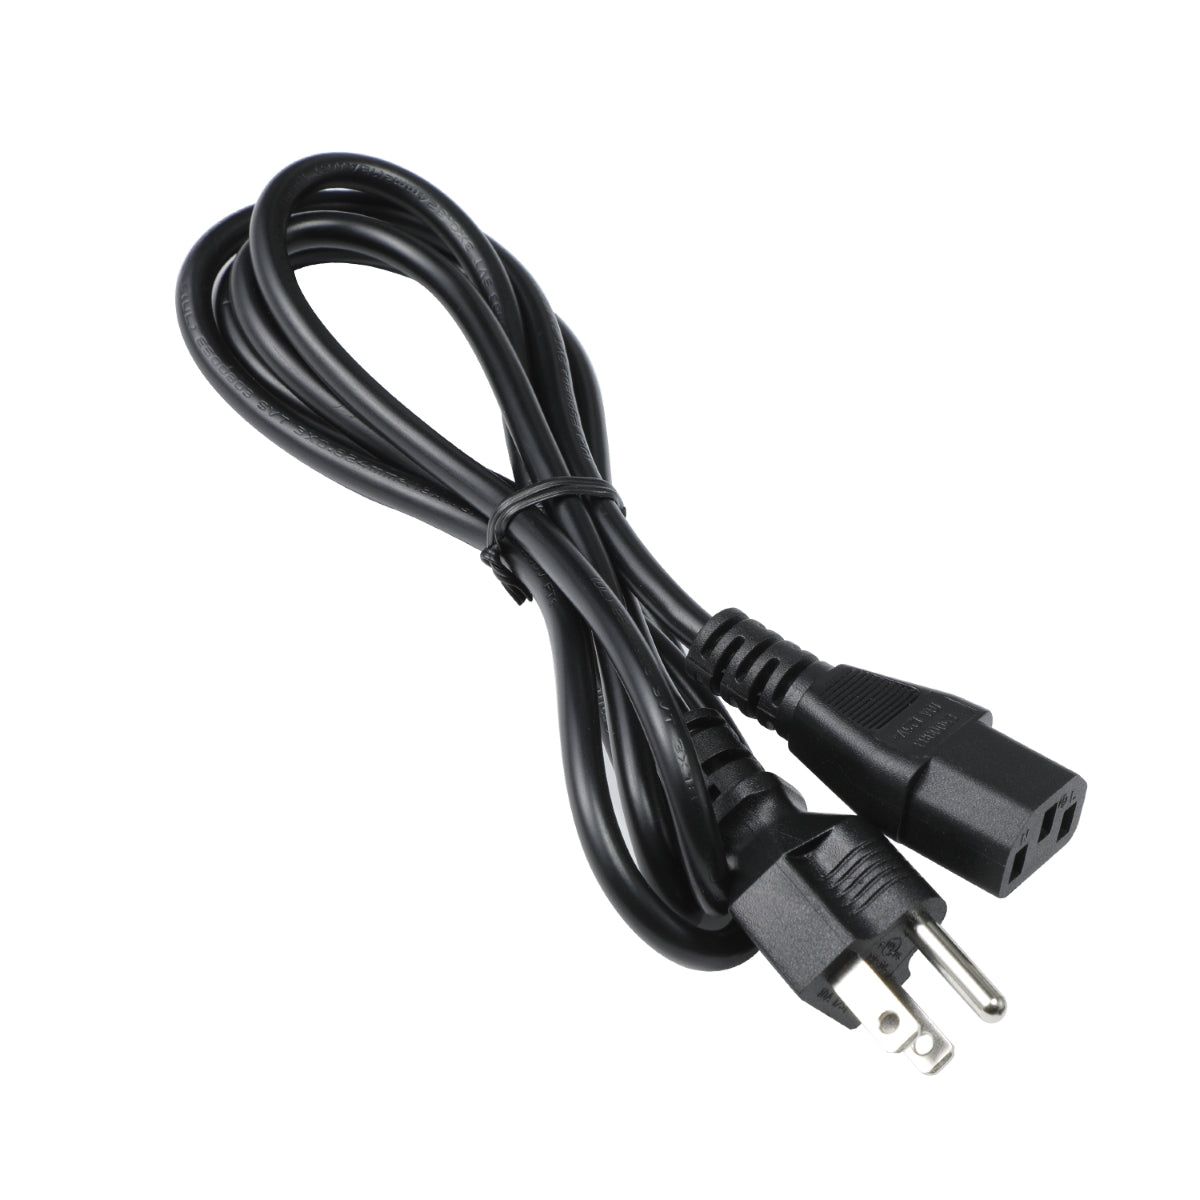 Power Cable for Philips 220B4LPCB Monitor.